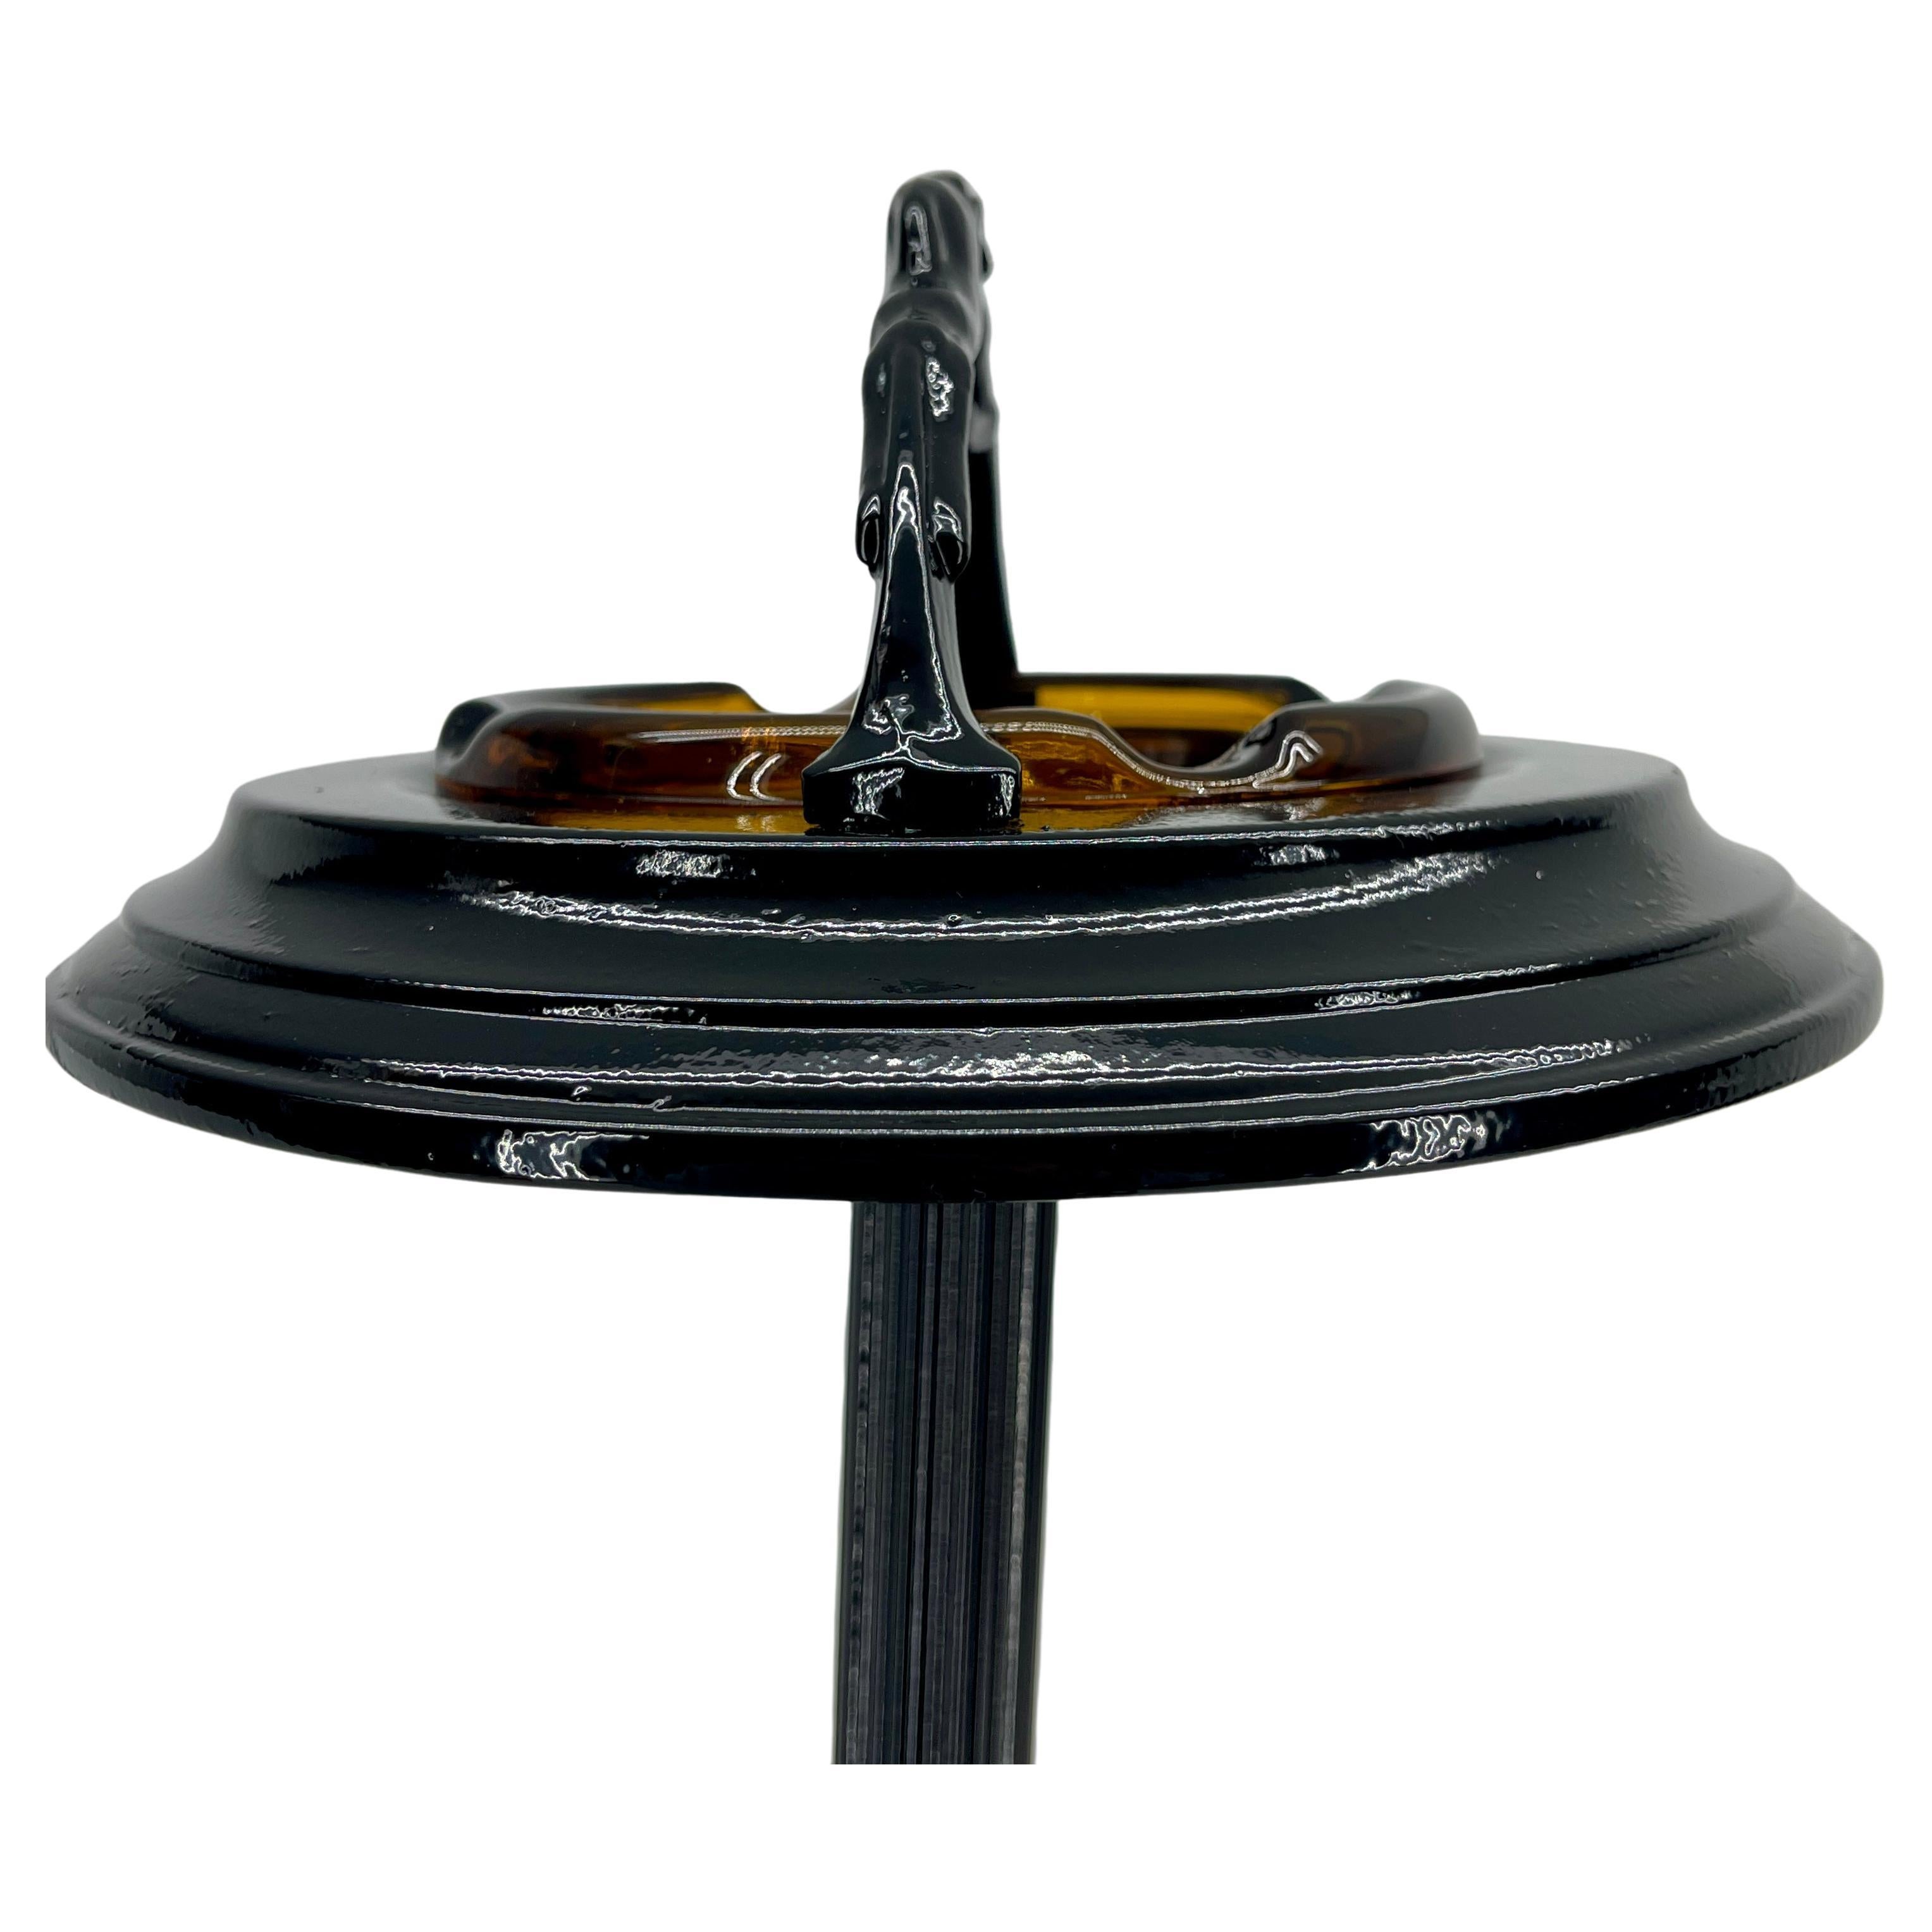 Black Painted Midcentury Floor Ashtray with Ram Sculpture and Amber Glass Tray In Good Condition For Sale In Haddonfield, NJ